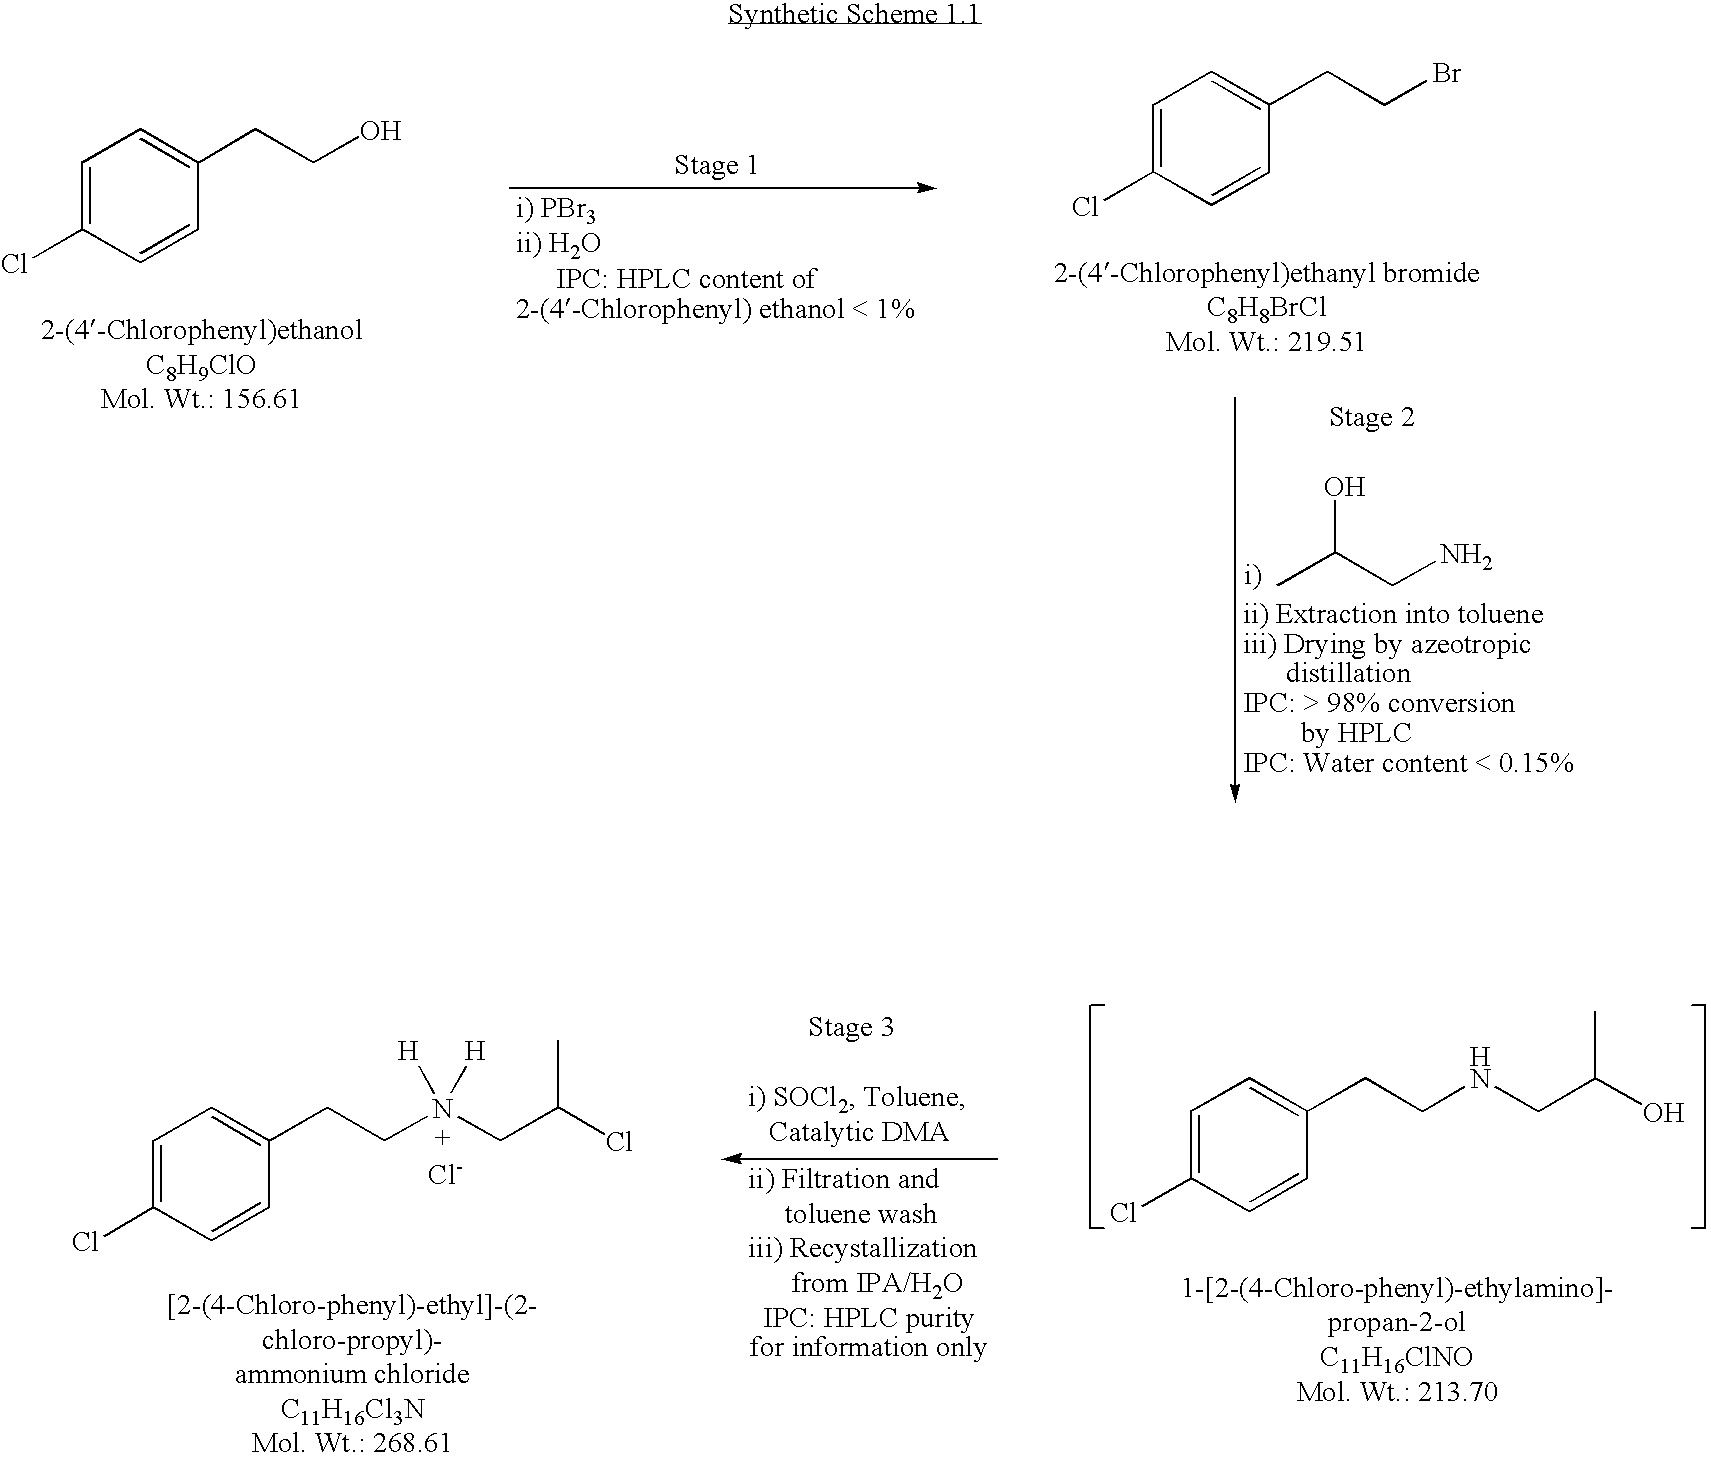 Processes for the Preparation of 8-Chloro-1-Methyl-2,3,4,5-Tetrahydro-1H-3-Benzazepine and Intermediates Related Thereto